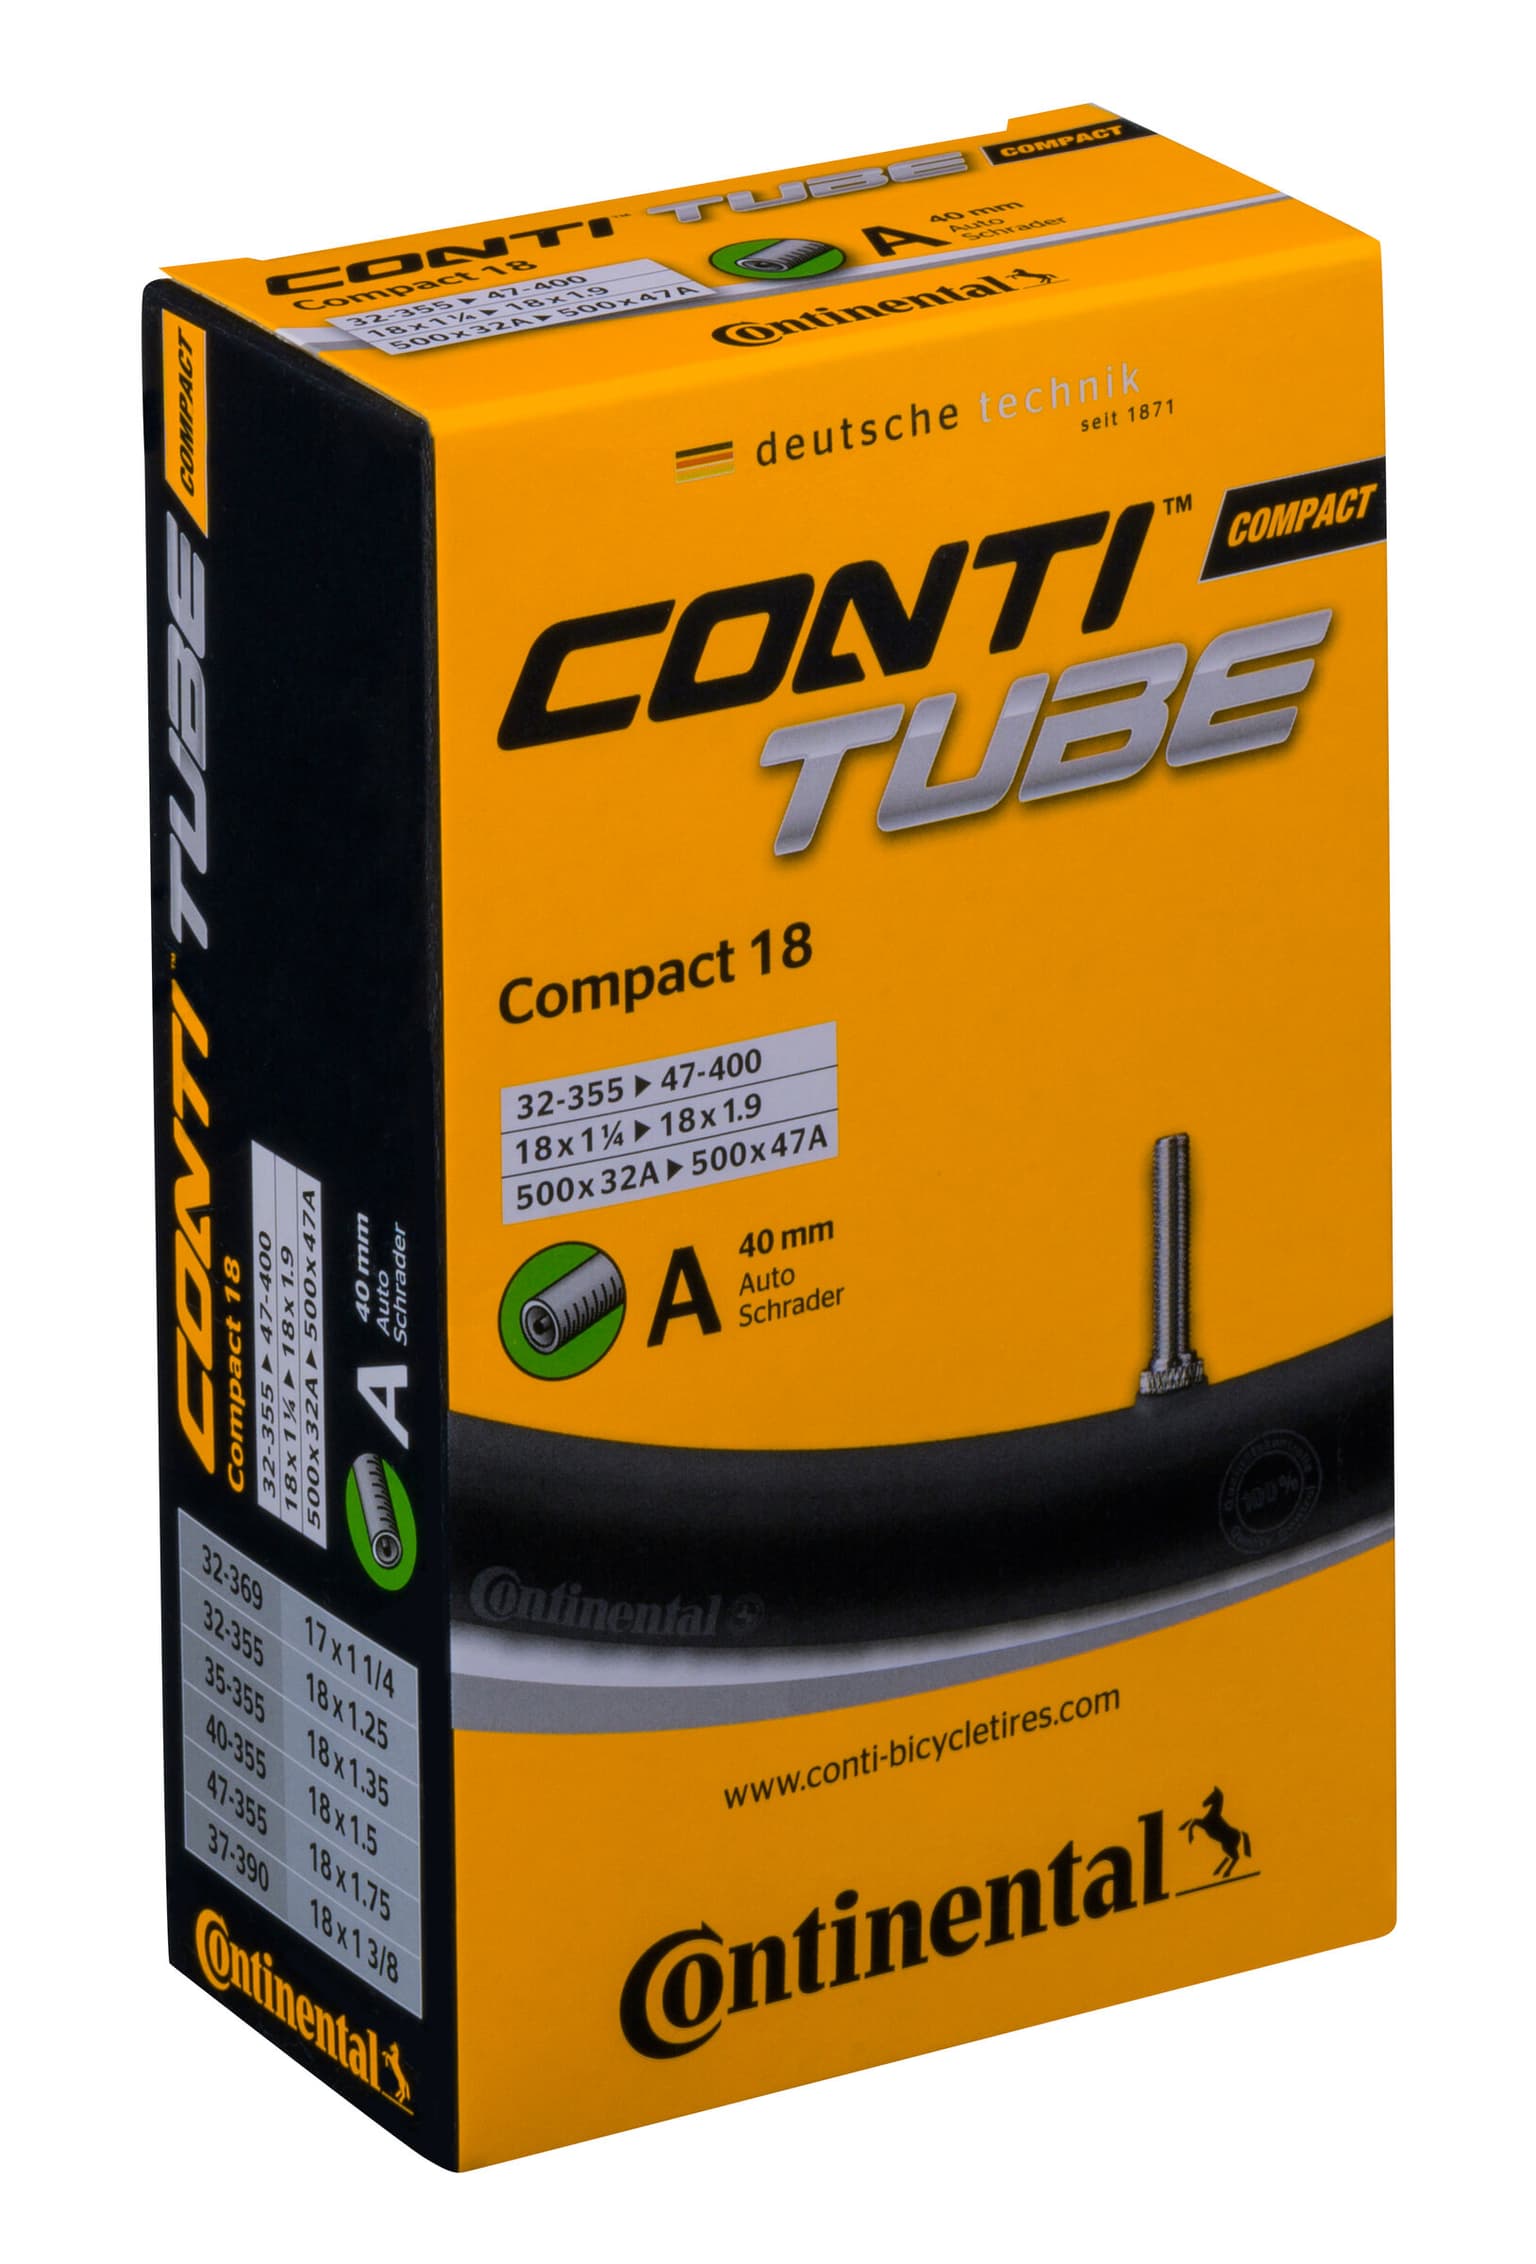 Continental Continental Unitube Compact 18 Veloschlauch 1